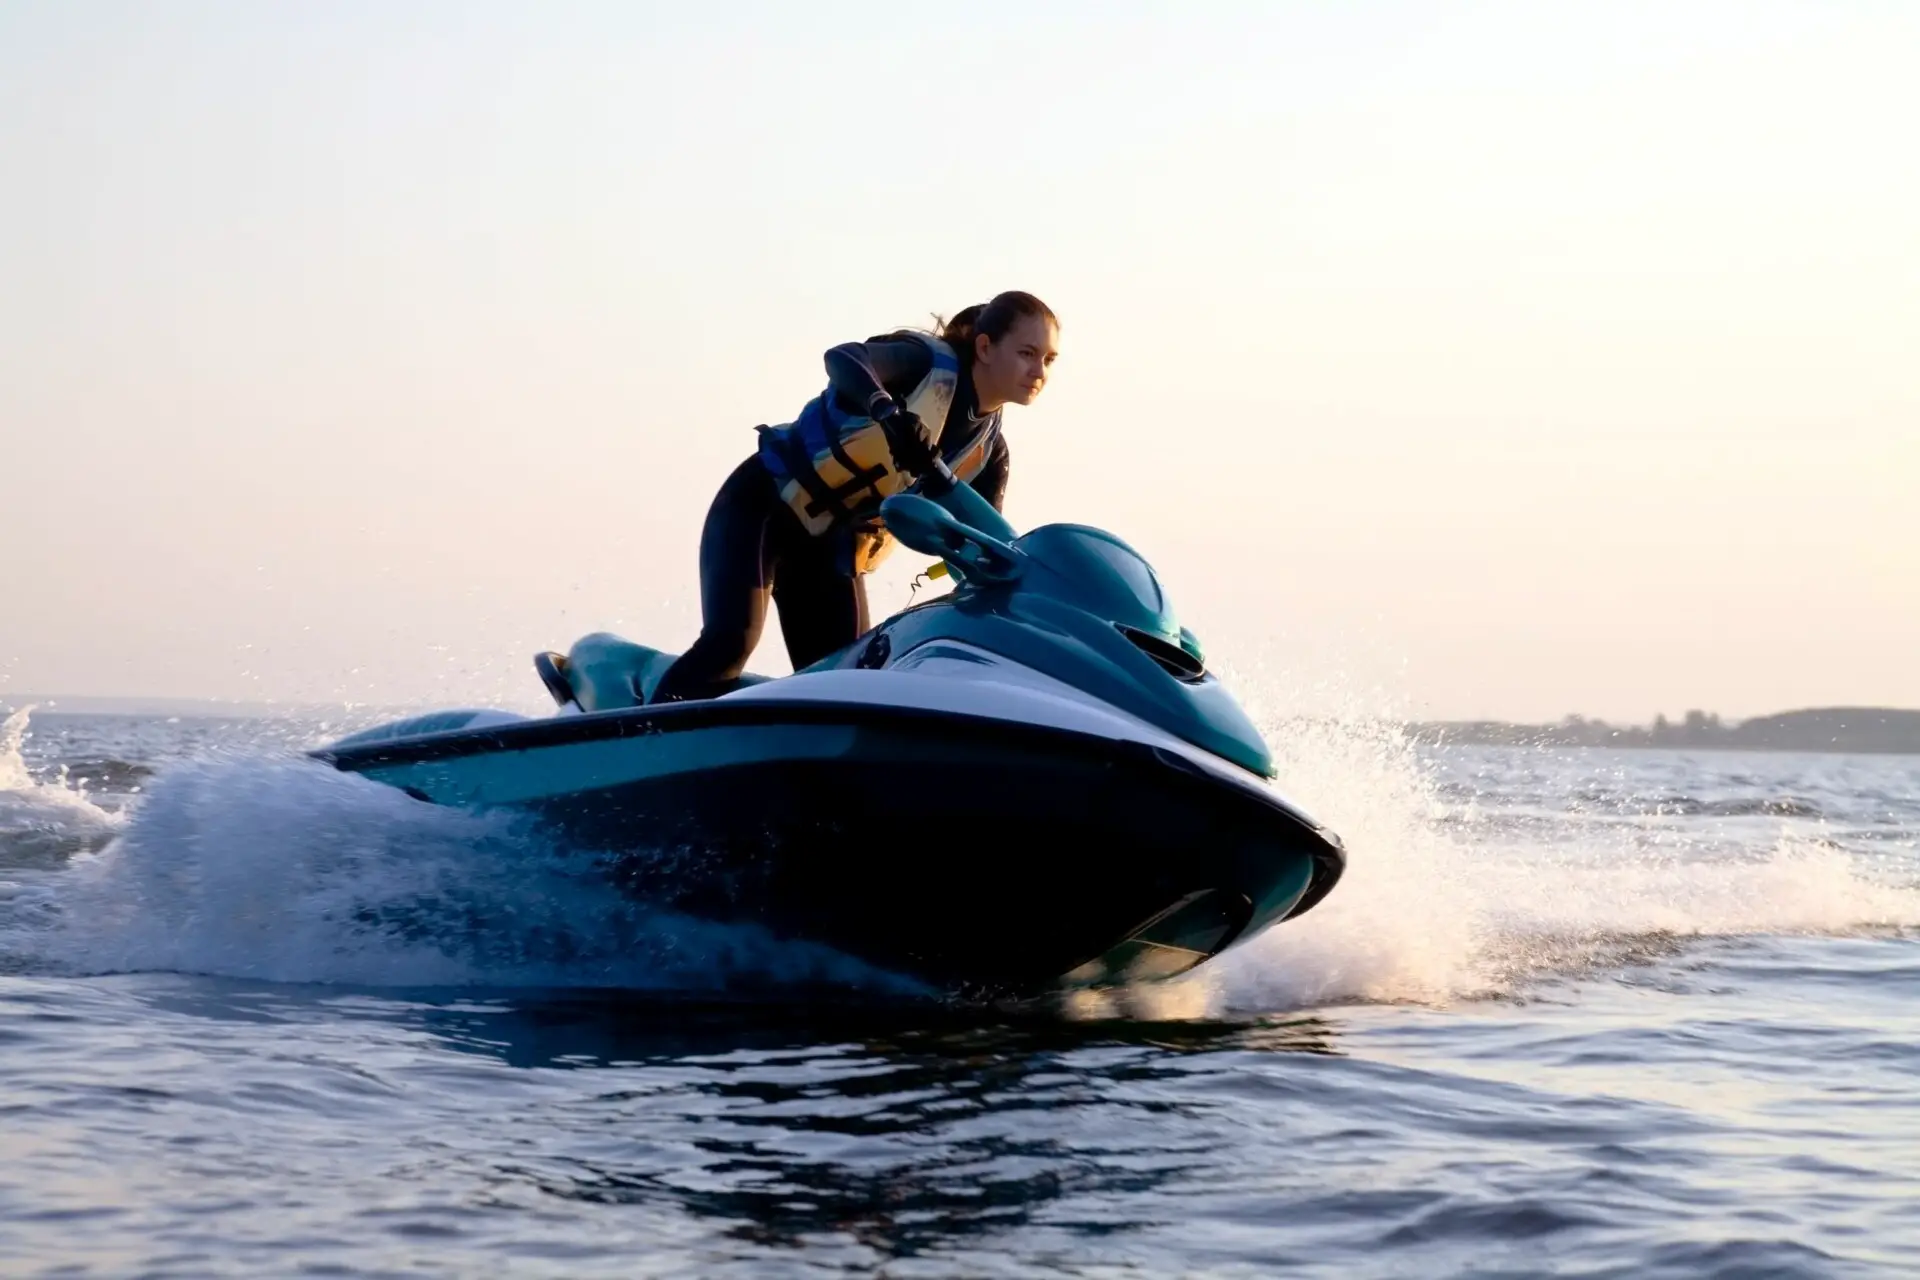 Are Jet Skis Bad for the Environment? 4 Things You Should Know